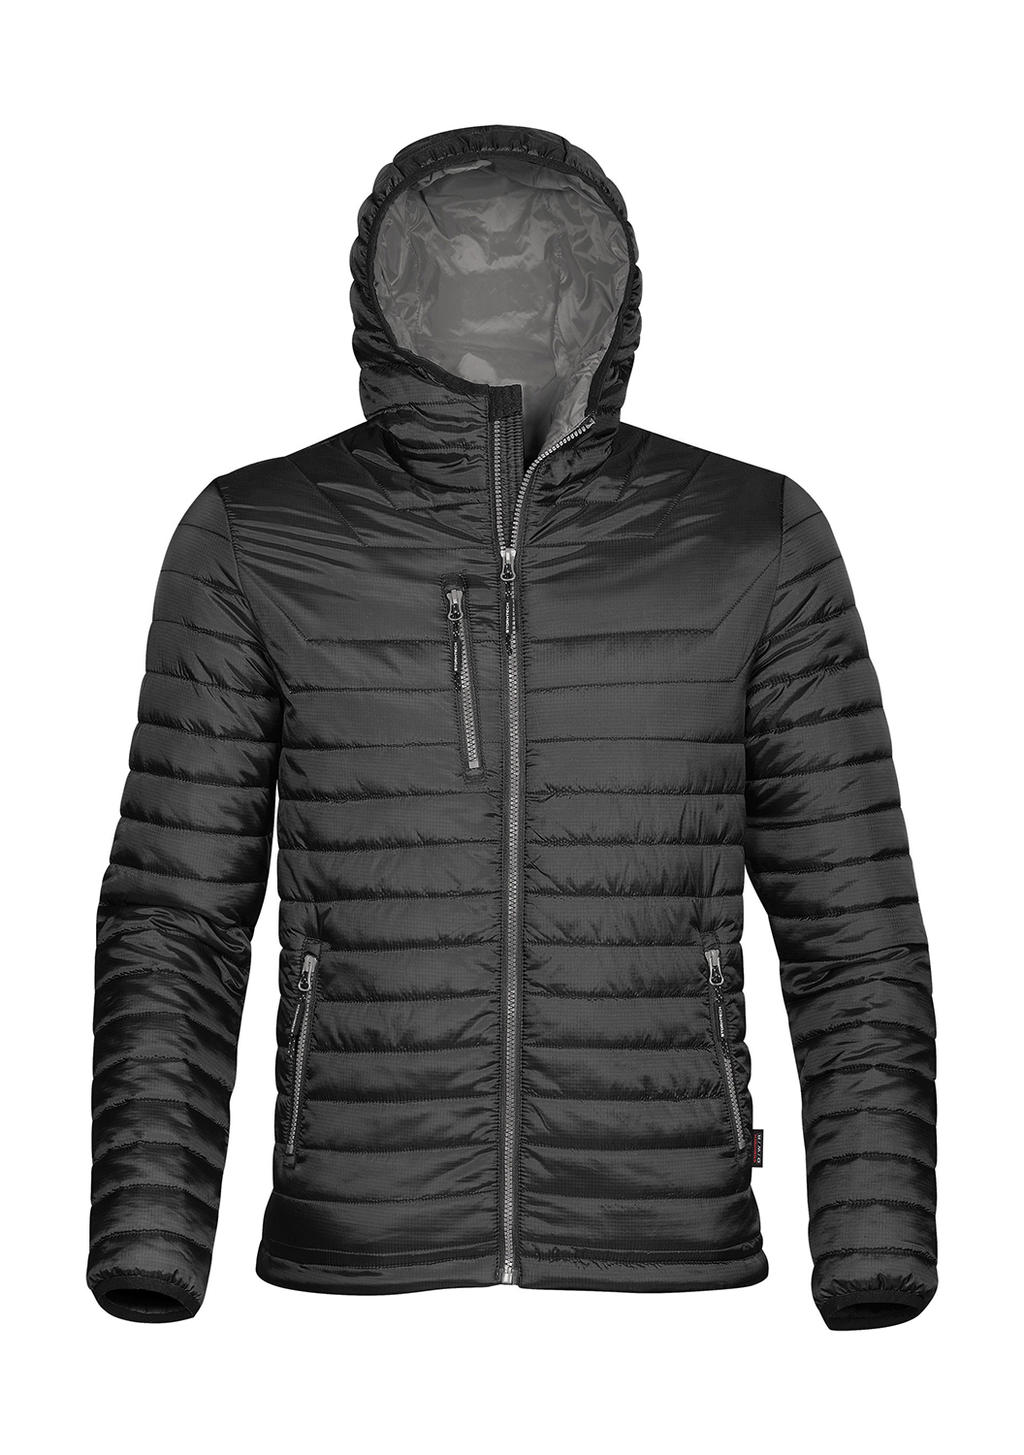  Gravity Thermal Jacket in Farbe Black/Charcoal